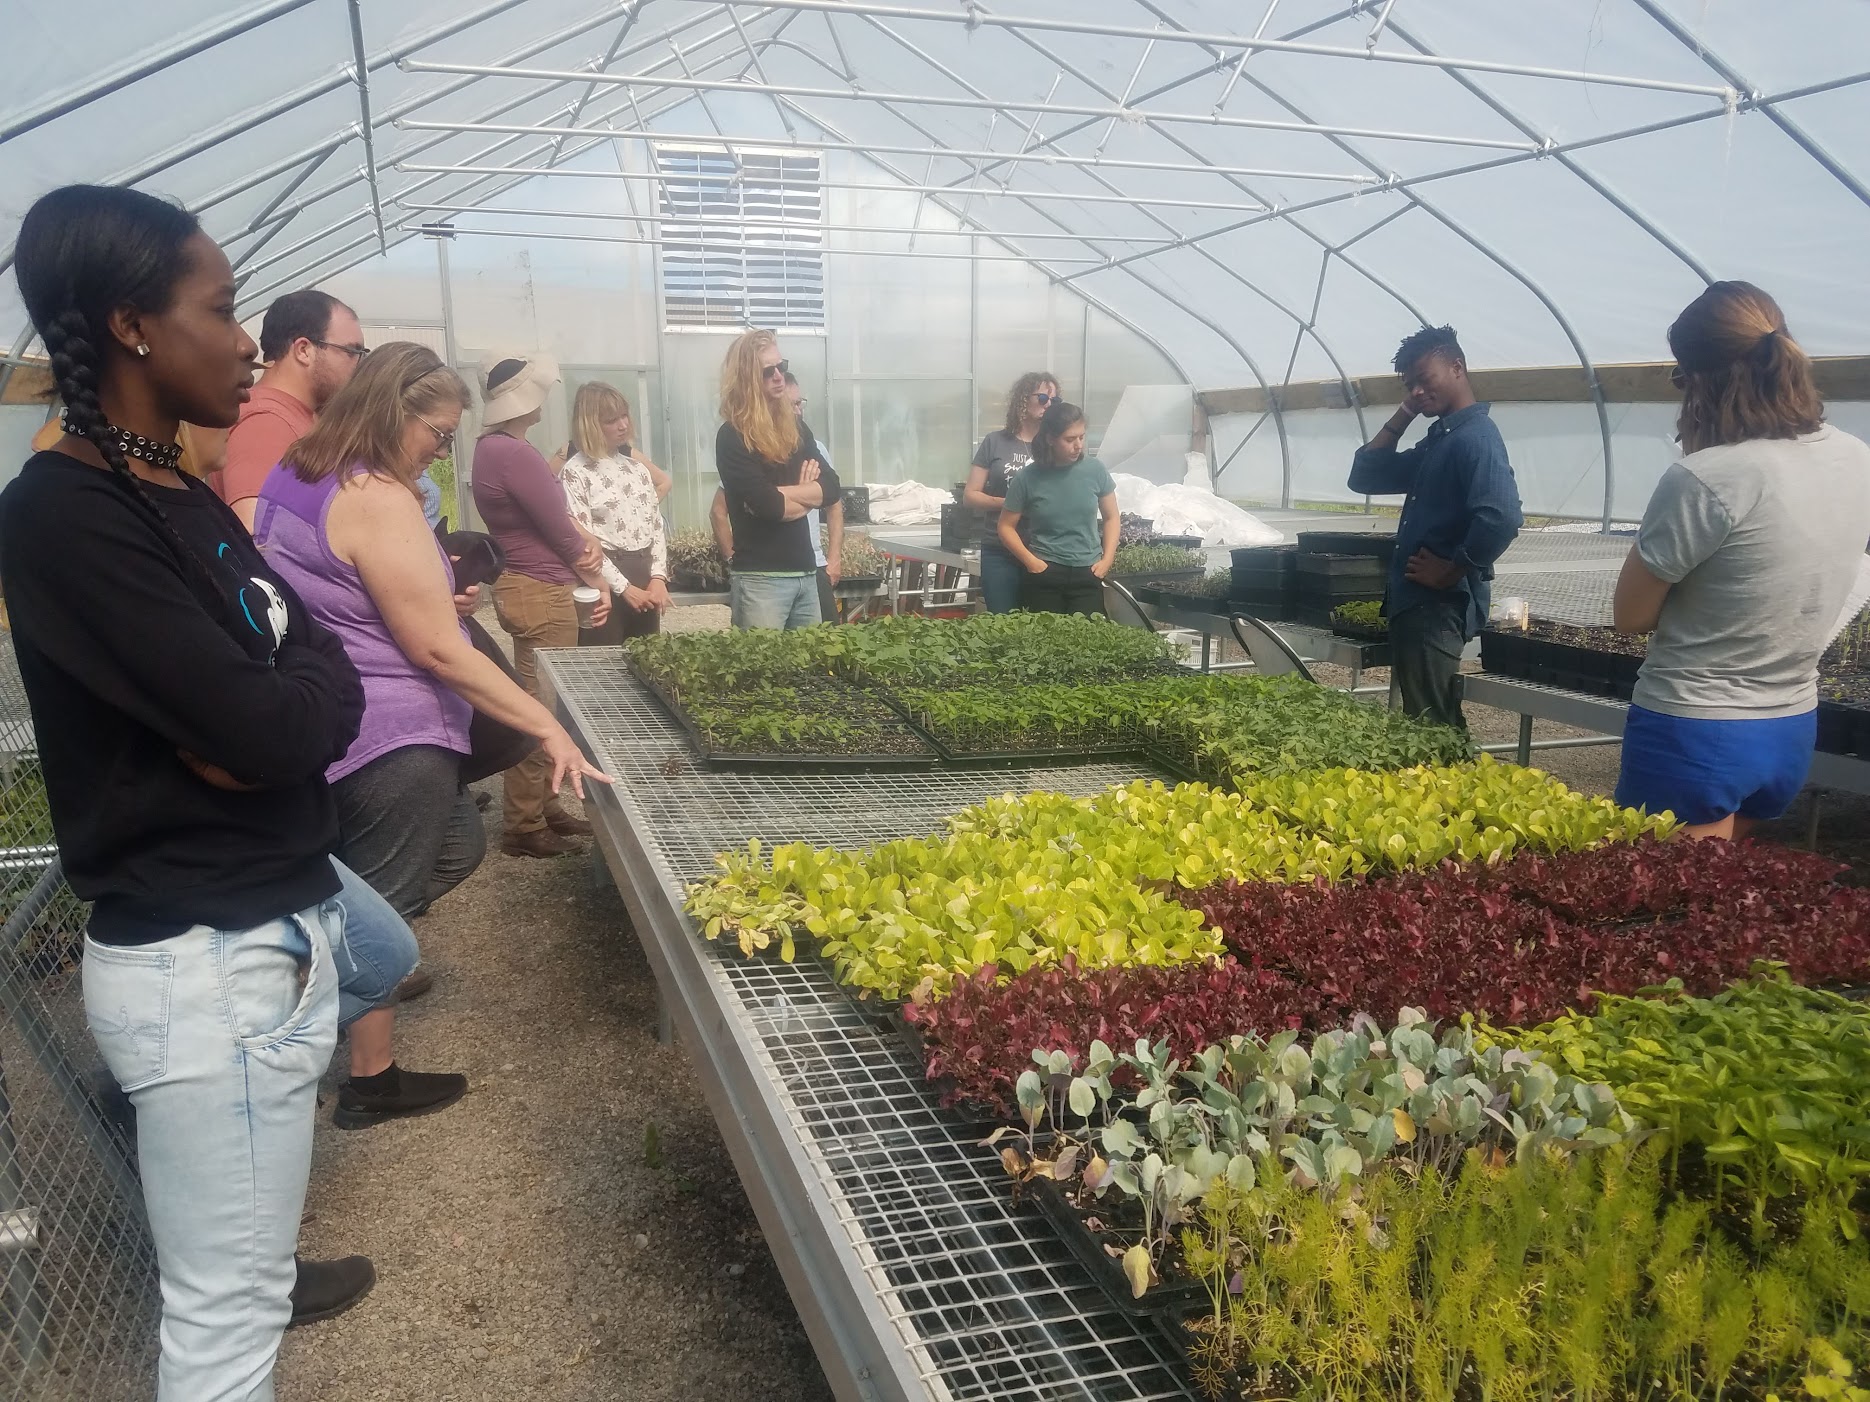 A group of people standing in a hoop house, around a table of baby lettuce transplants.